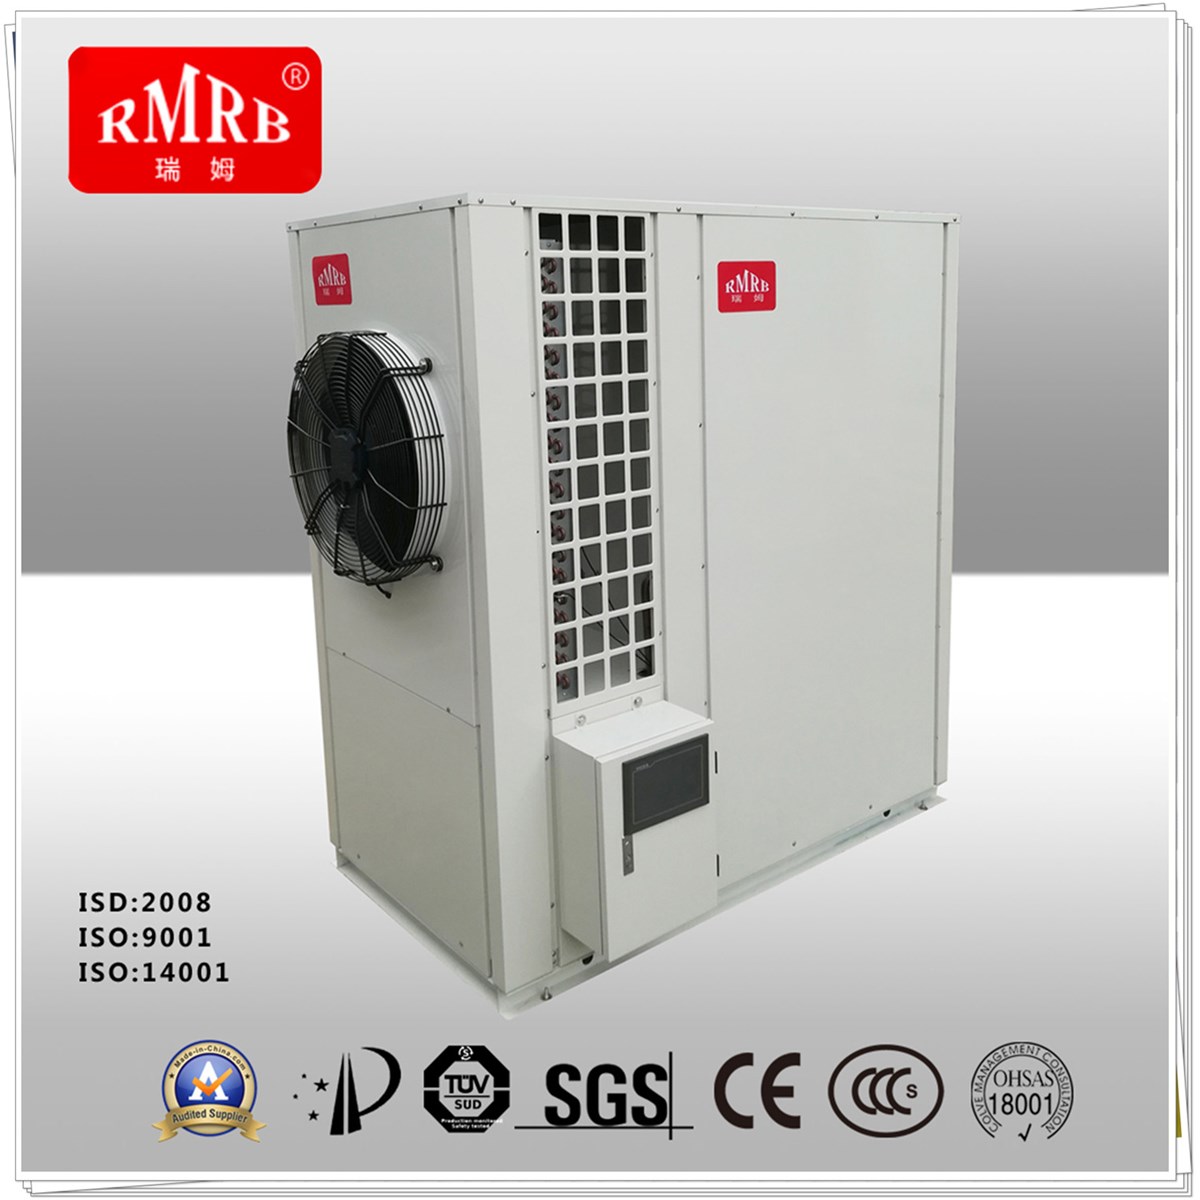 Pool heating units manufacture Spa air source induction heat pump machinery